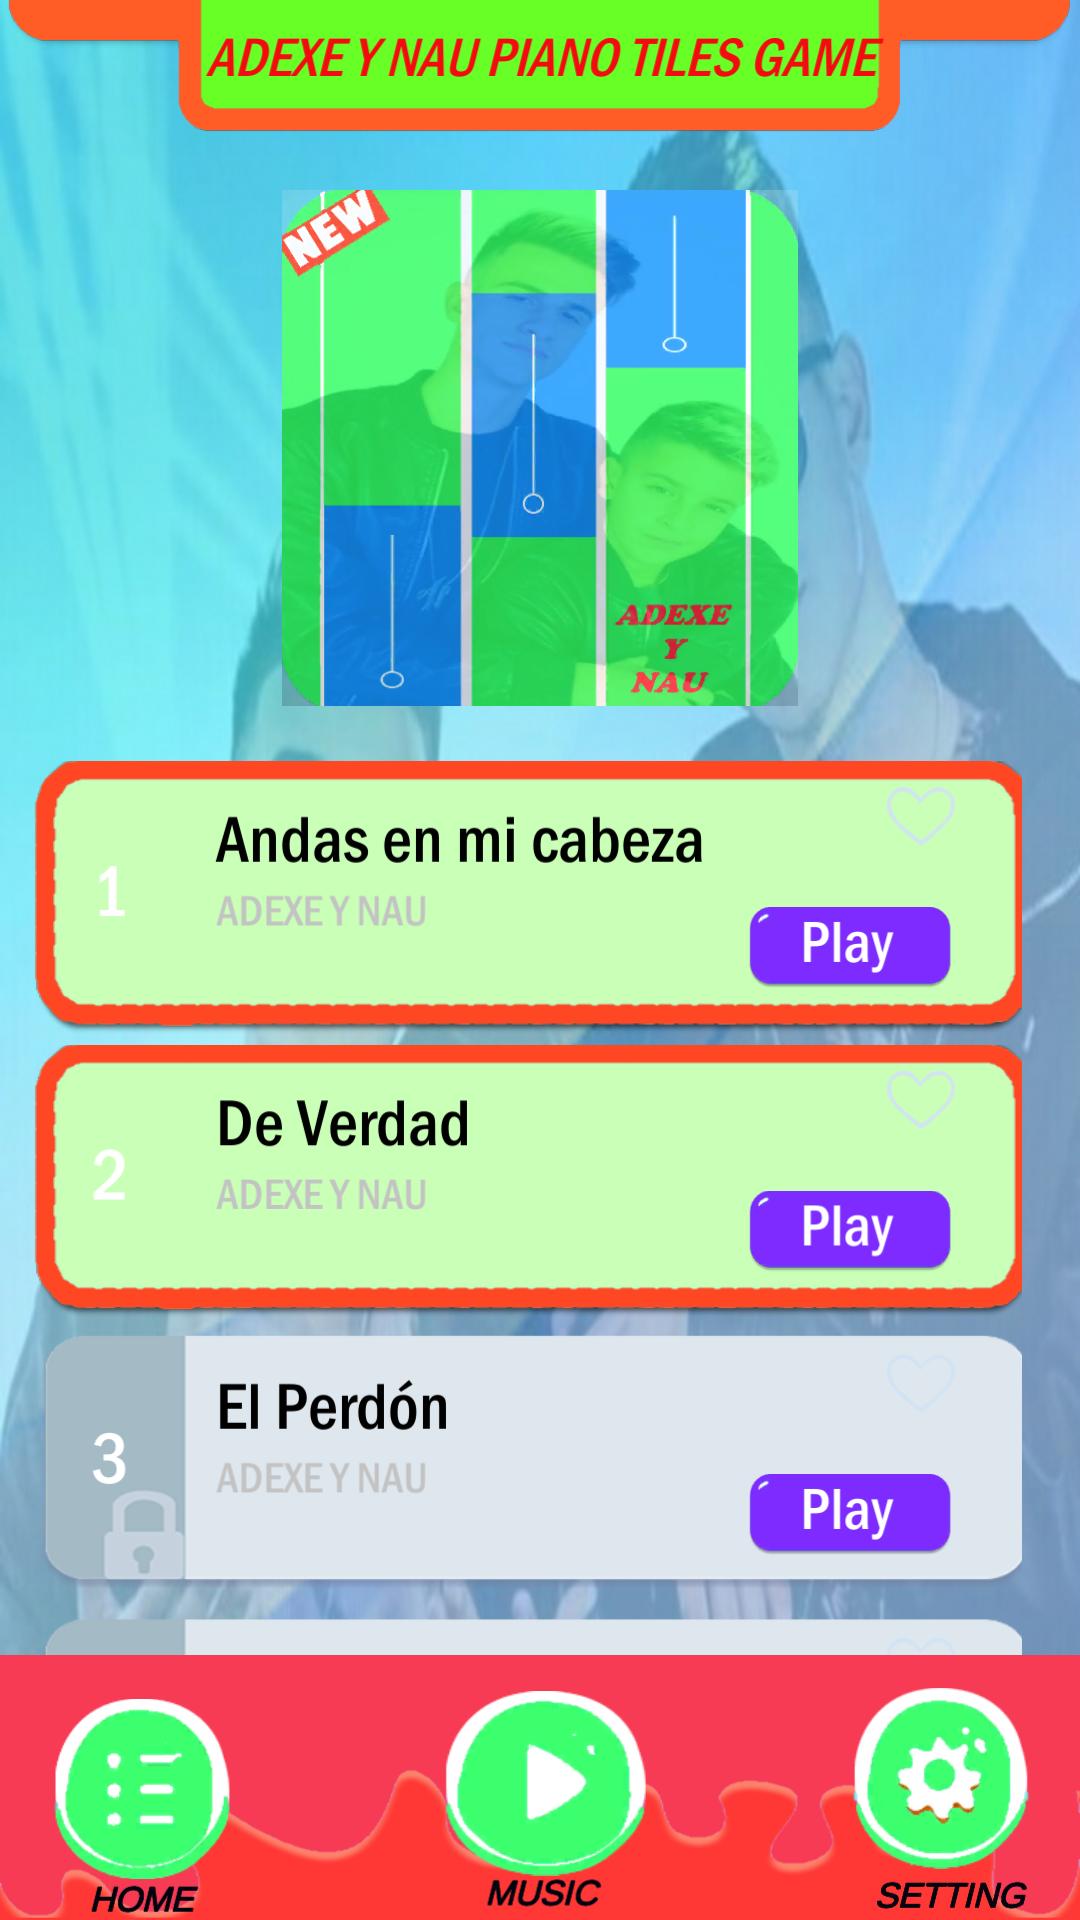 Adexe Y Nau Piano Tiles Game For Android Apk Download - tale as old as time piano sheet music roblox how to get